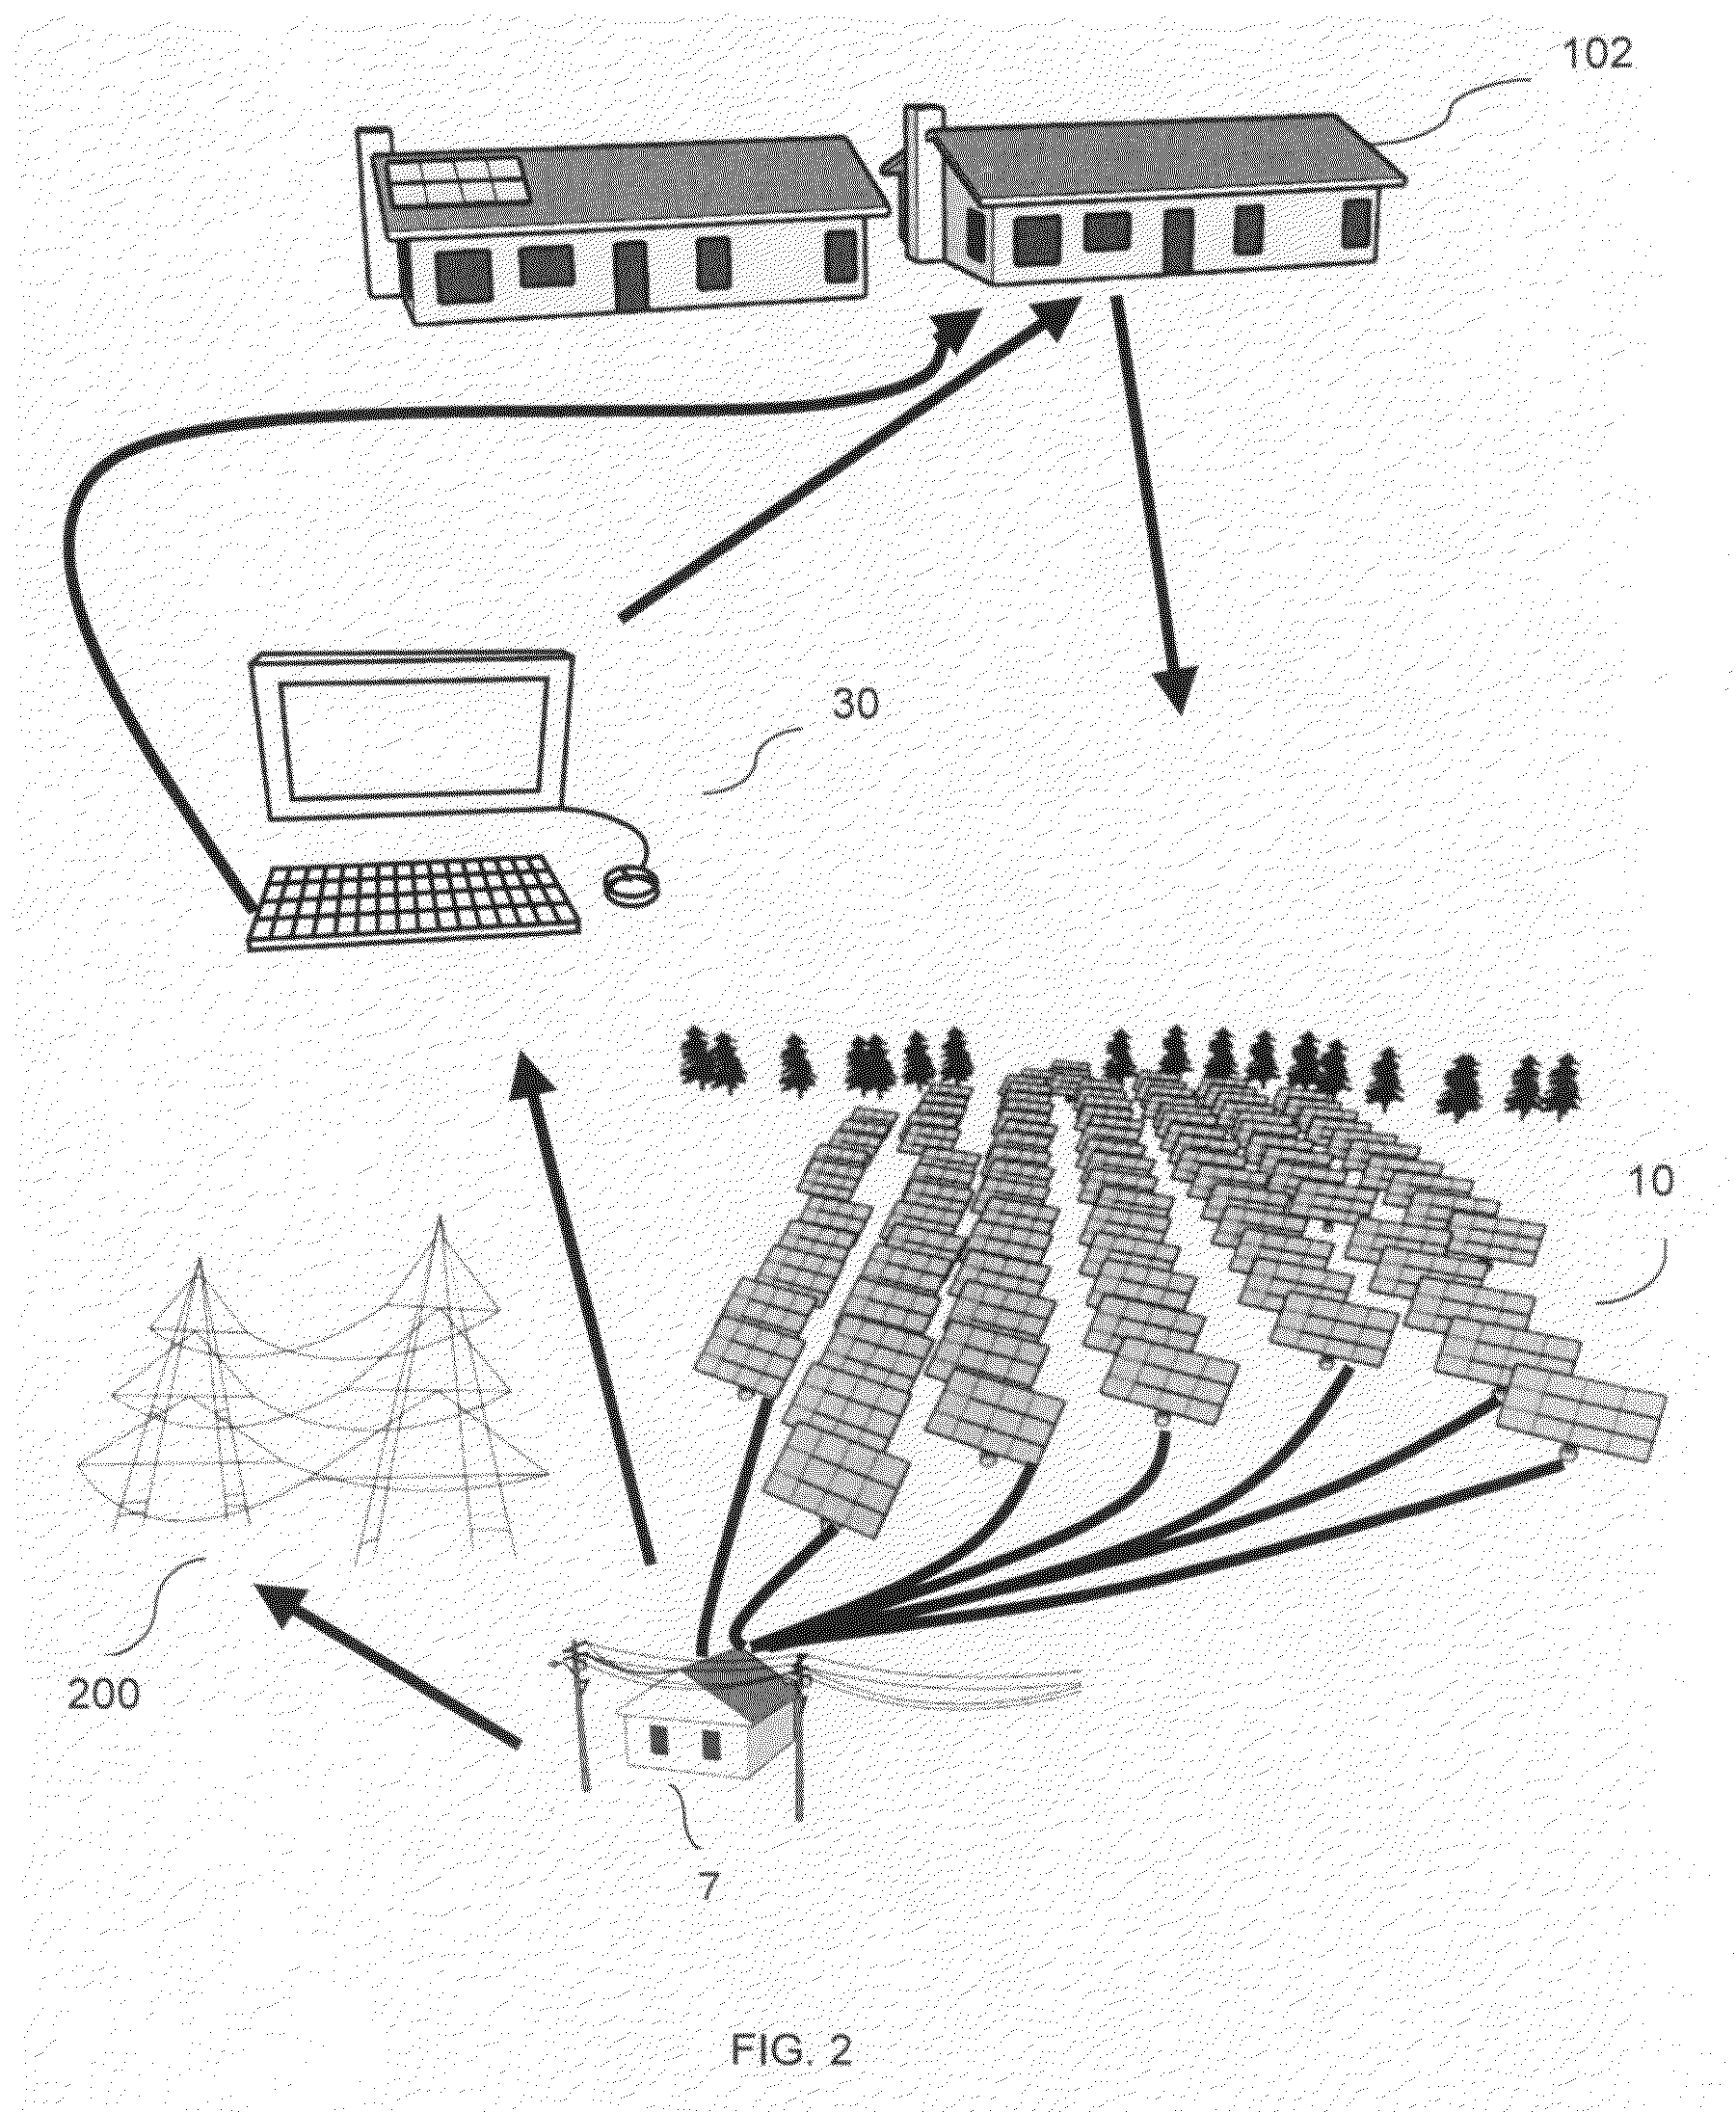 Method and system for remote generation of renewable energy